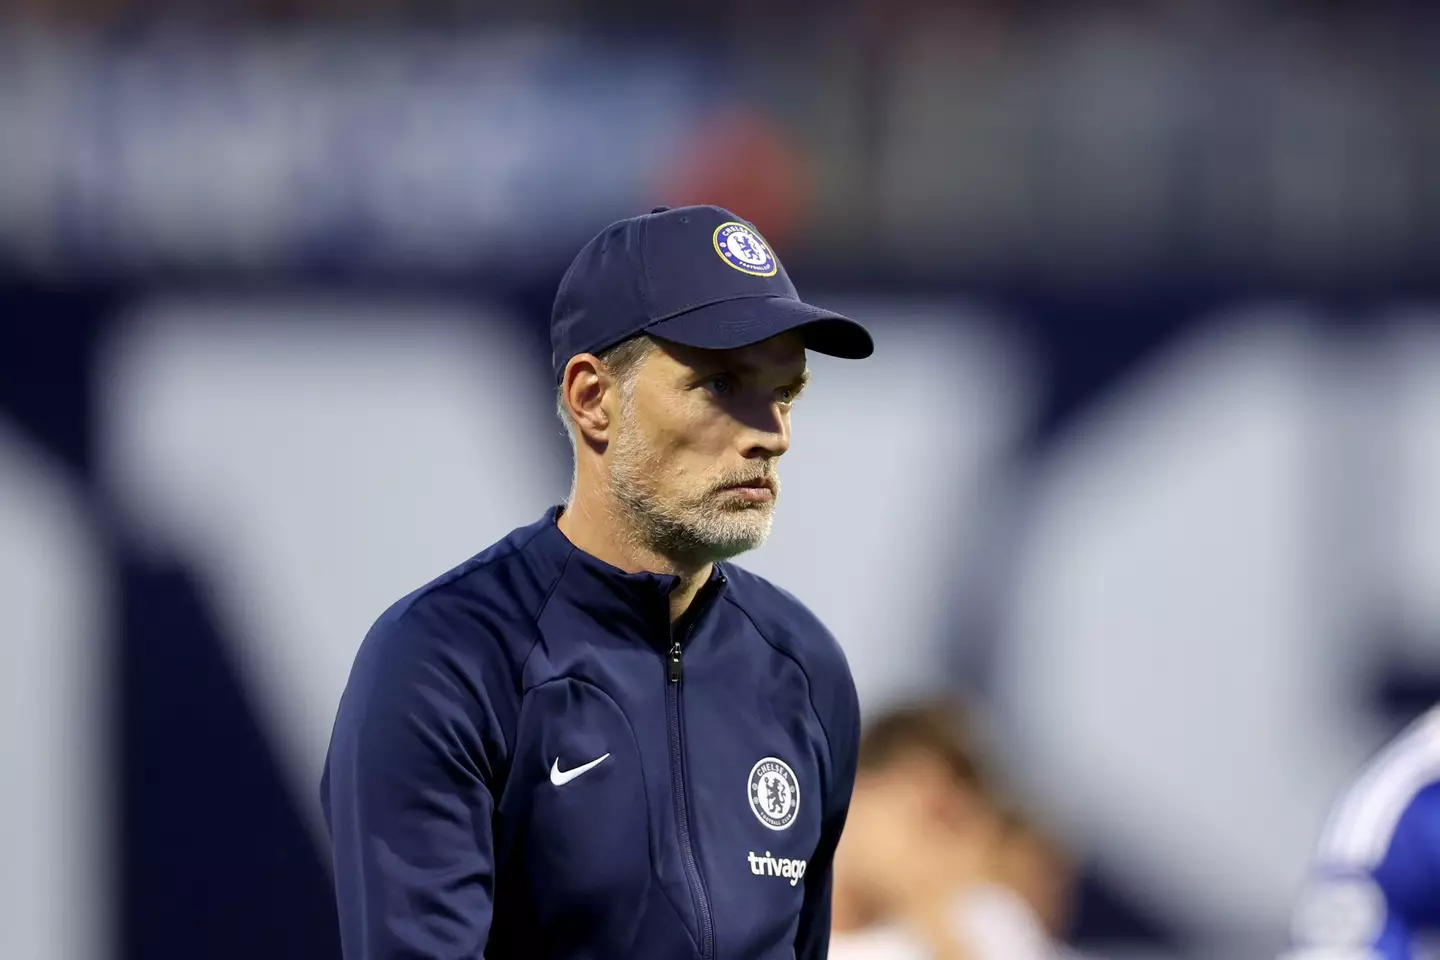 Tuchel looking forlorn after the loss to Dinamo Zagreb. Image: Alamy